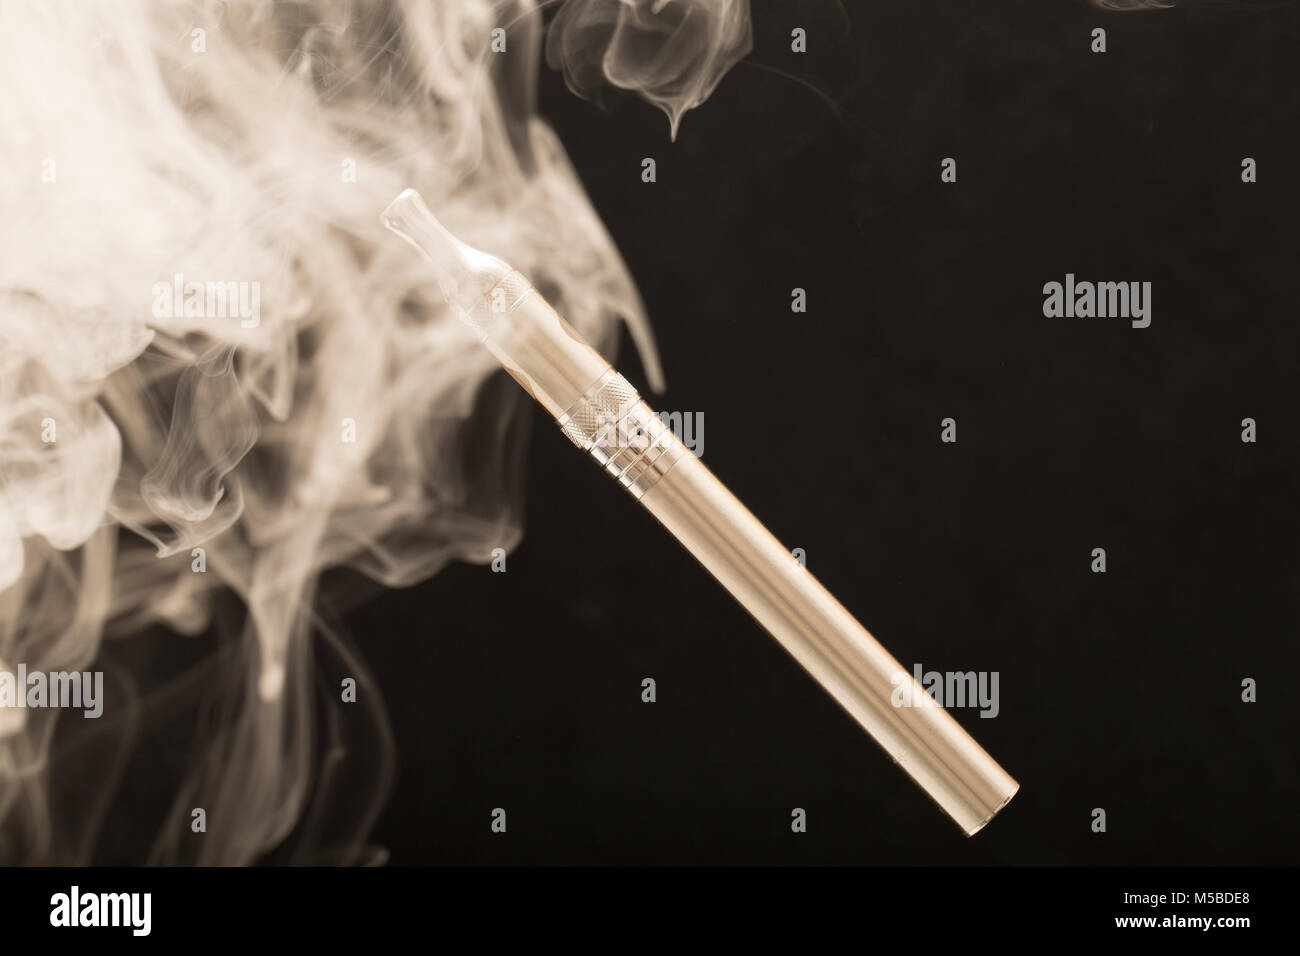 Electric cigarette or E cigarette surrounded by vapour from its E liquid. England UK GB. Photographed on a black background. Stock Photo